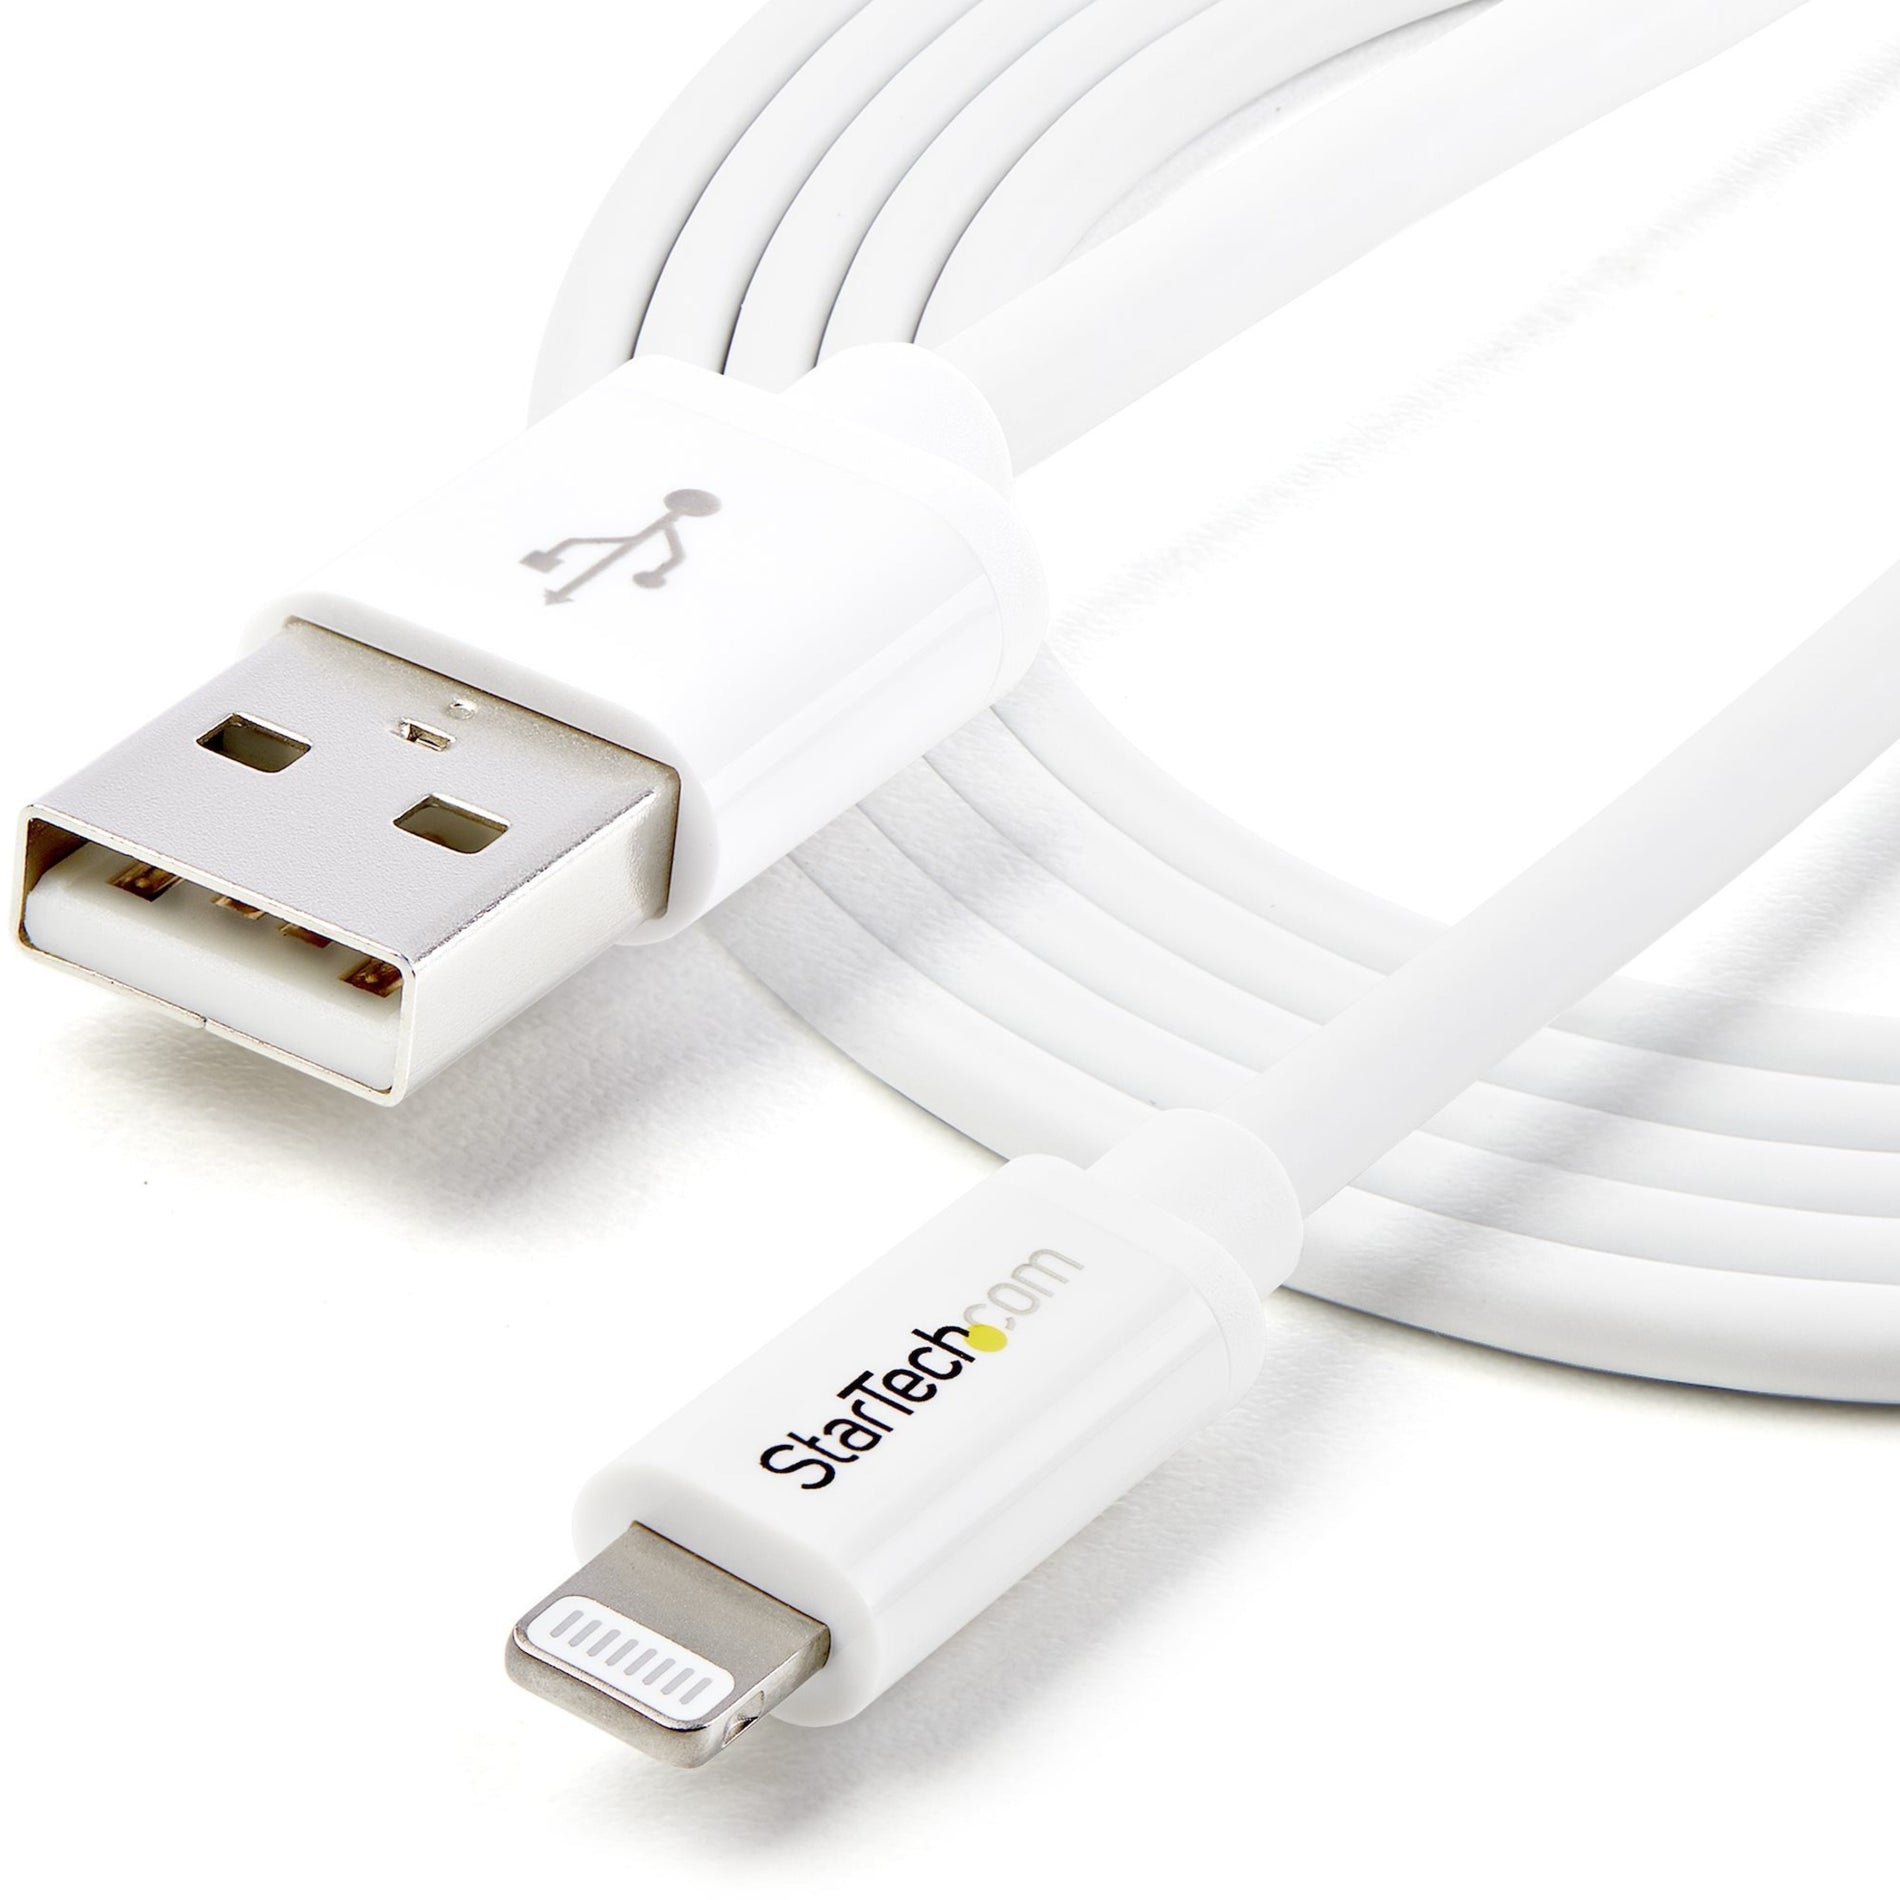 StarTech.com USBLT2MW Sync/Charge Lightning/USB Data Transfer Cable, 6ft Long White Apple-Compatible Cable